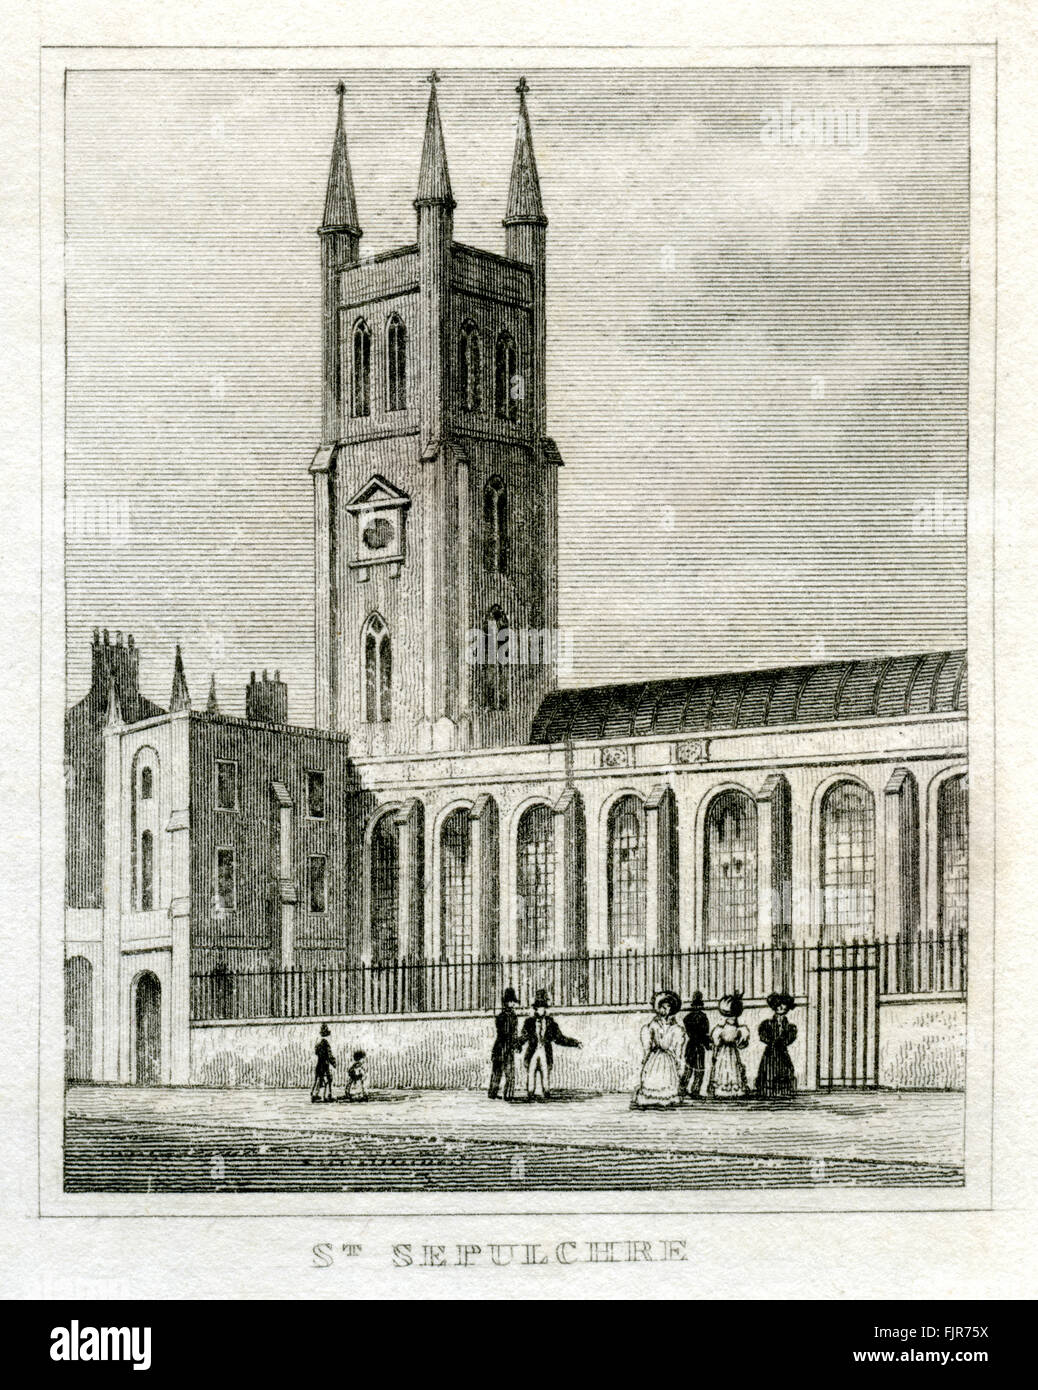 St Sepulchre, Holborn Viaduct, London. From 1835 print. Stock Photo